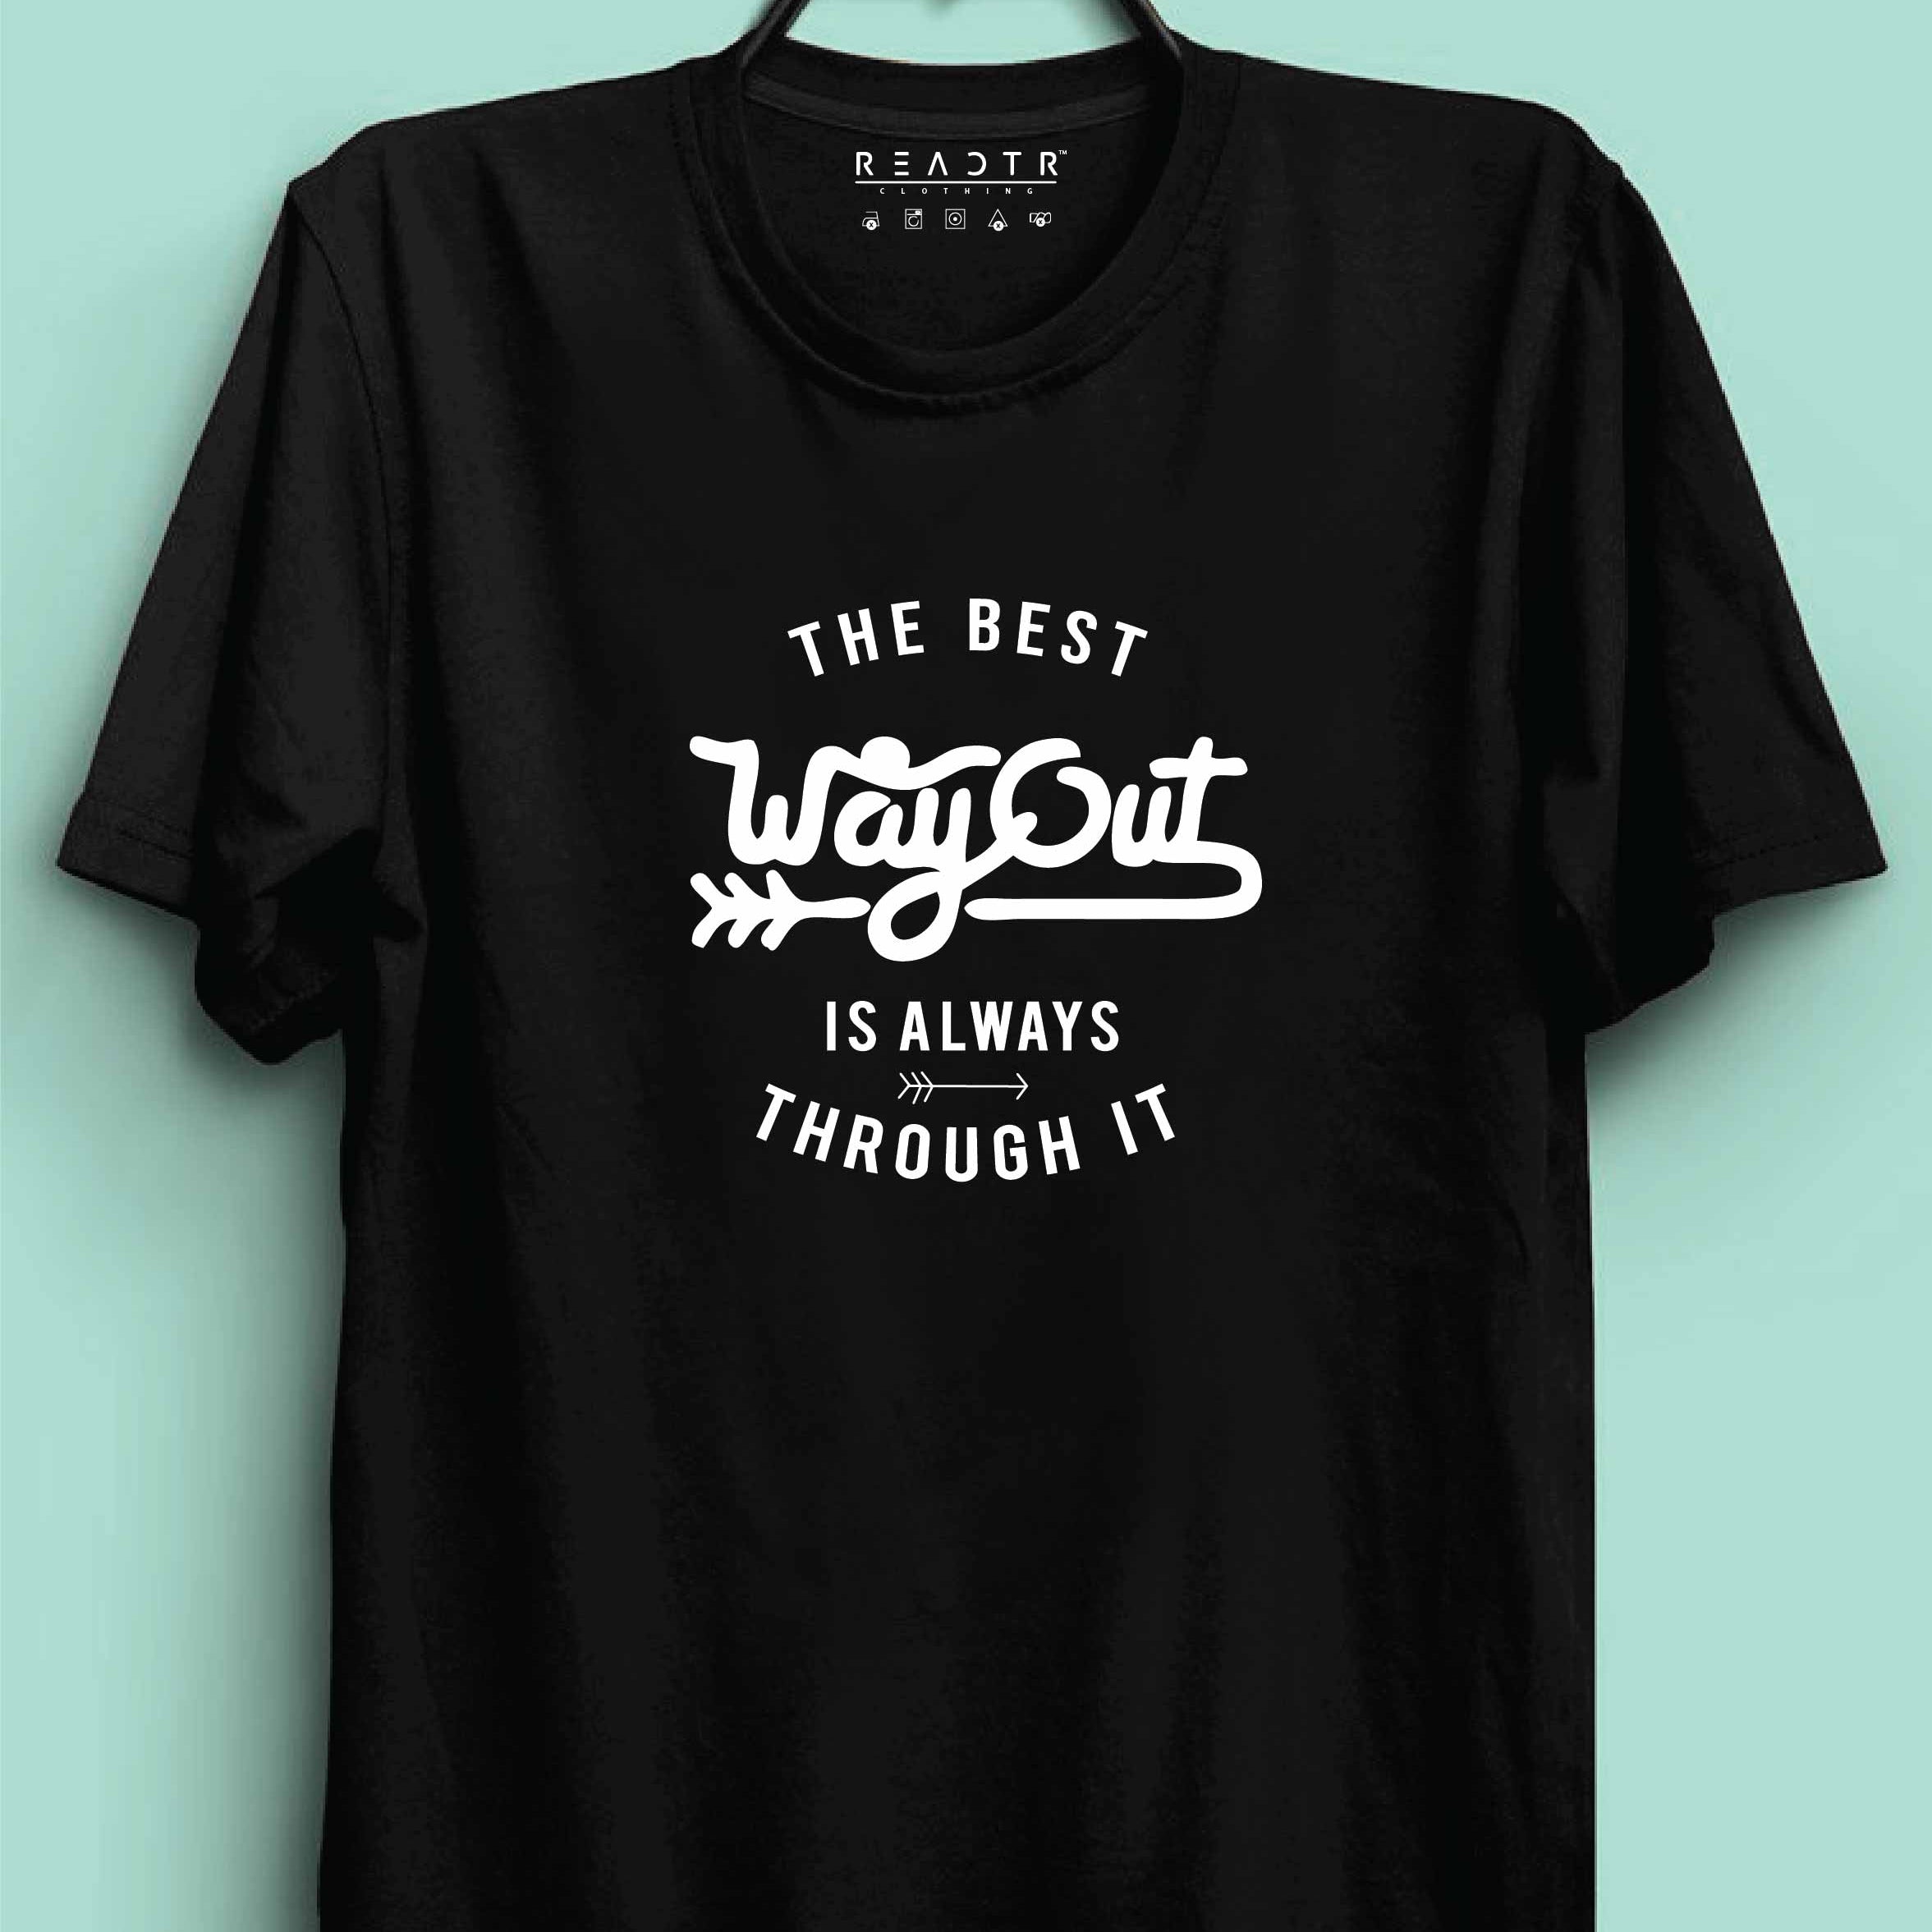 The Best Way Out Reactr Tshirts For Men - Eyewearlabs